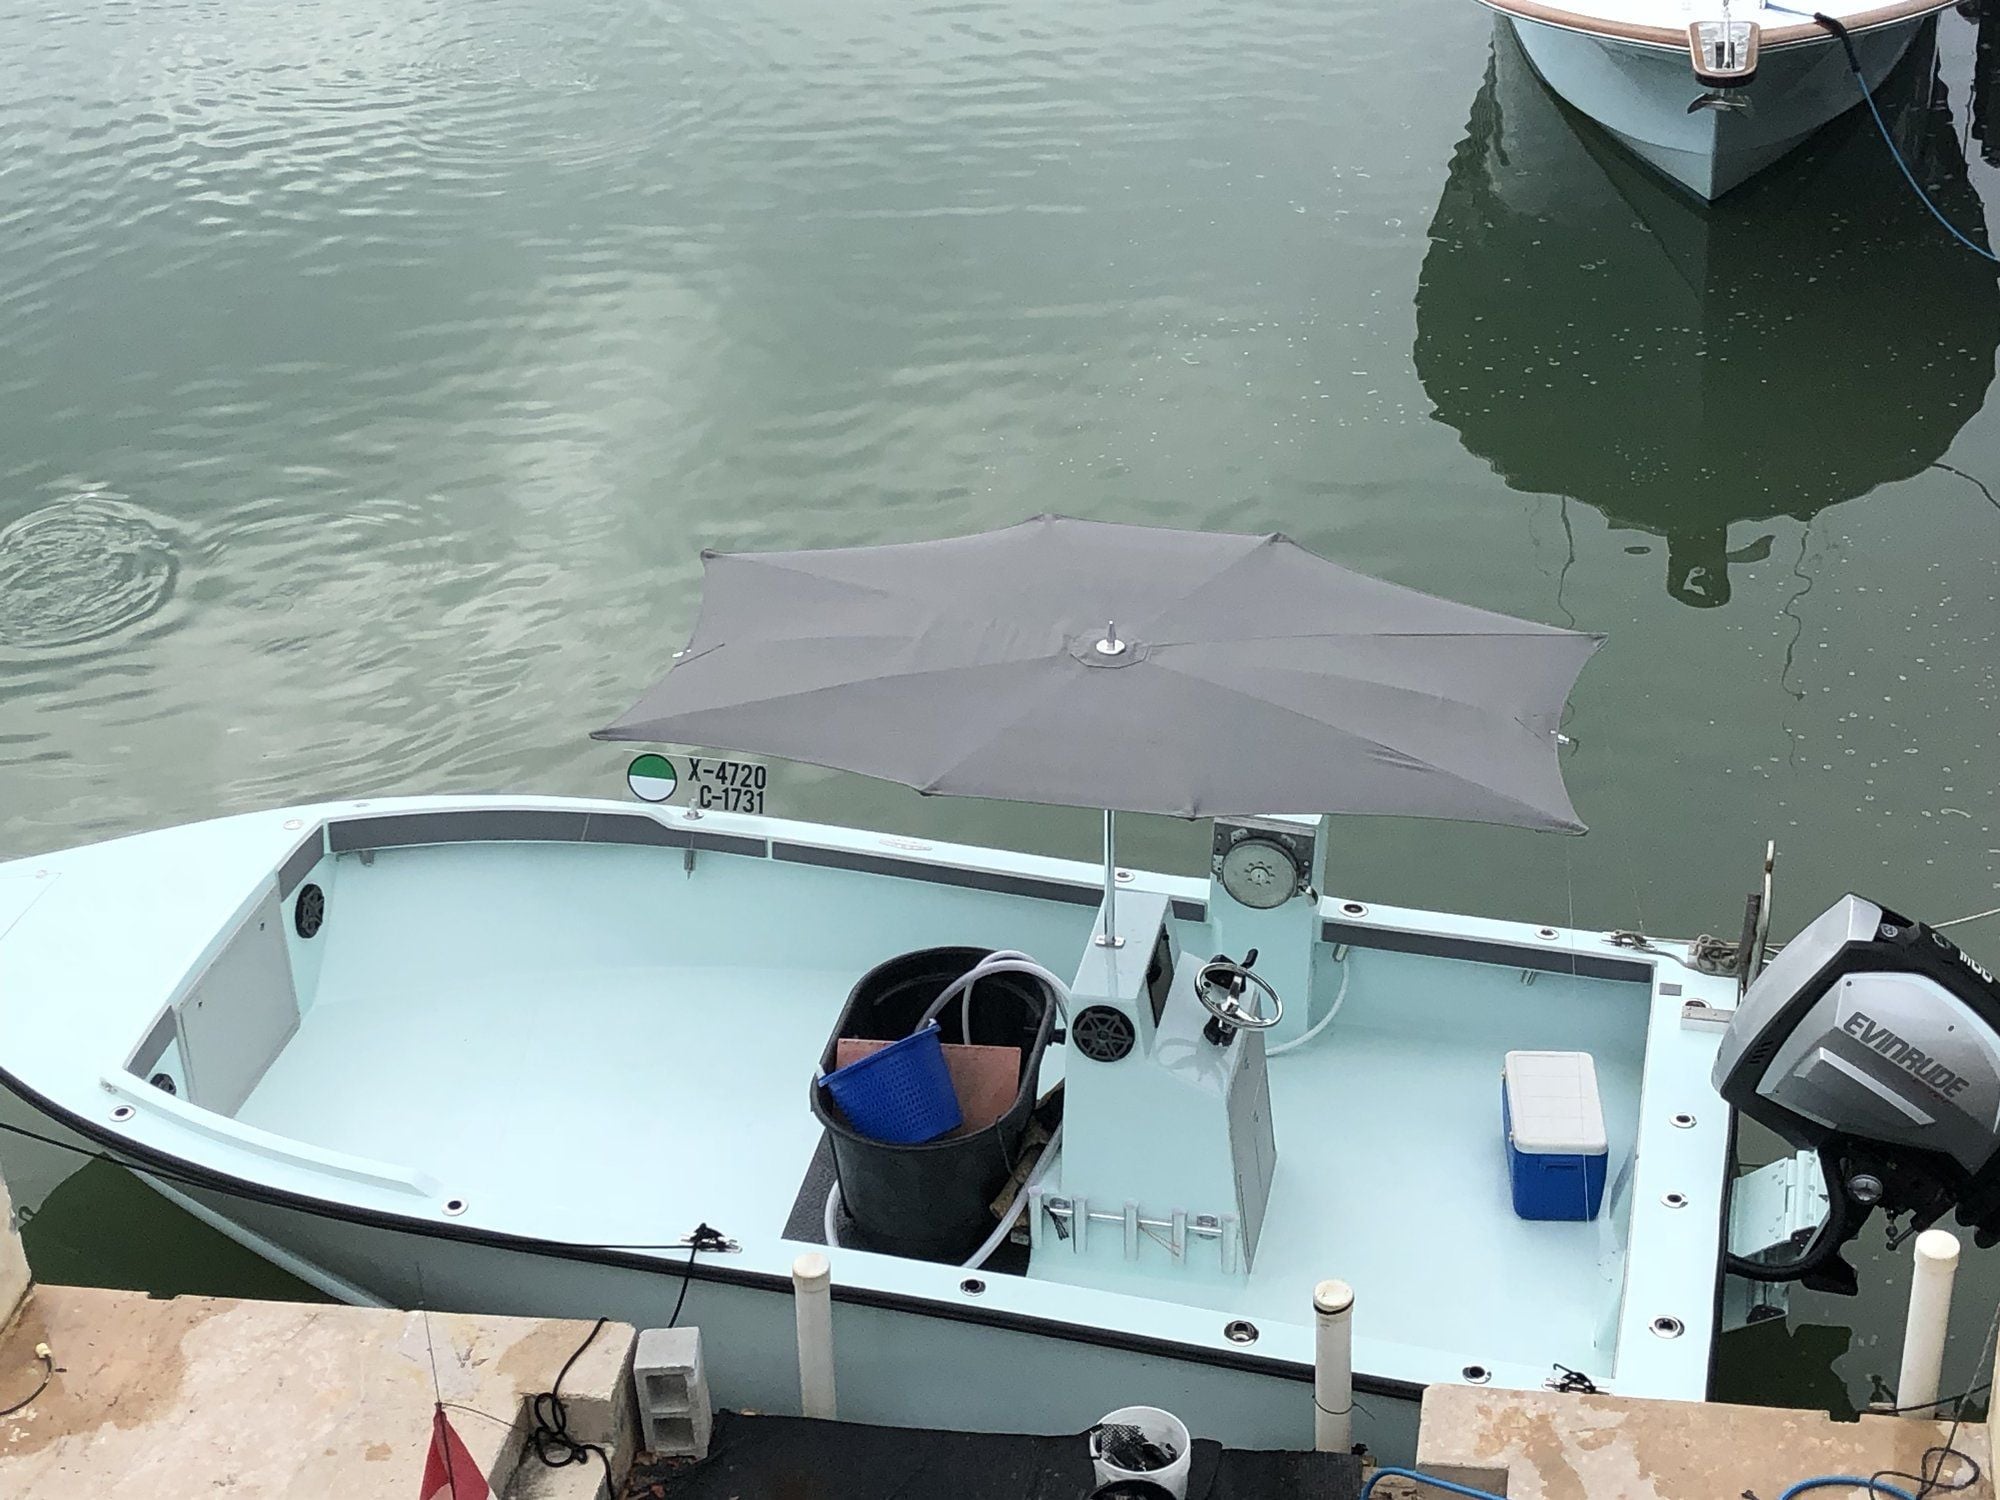 Tuuci Shade Blade (1000 hour review) - The Hull Truth - Boating and Fishing  Forum